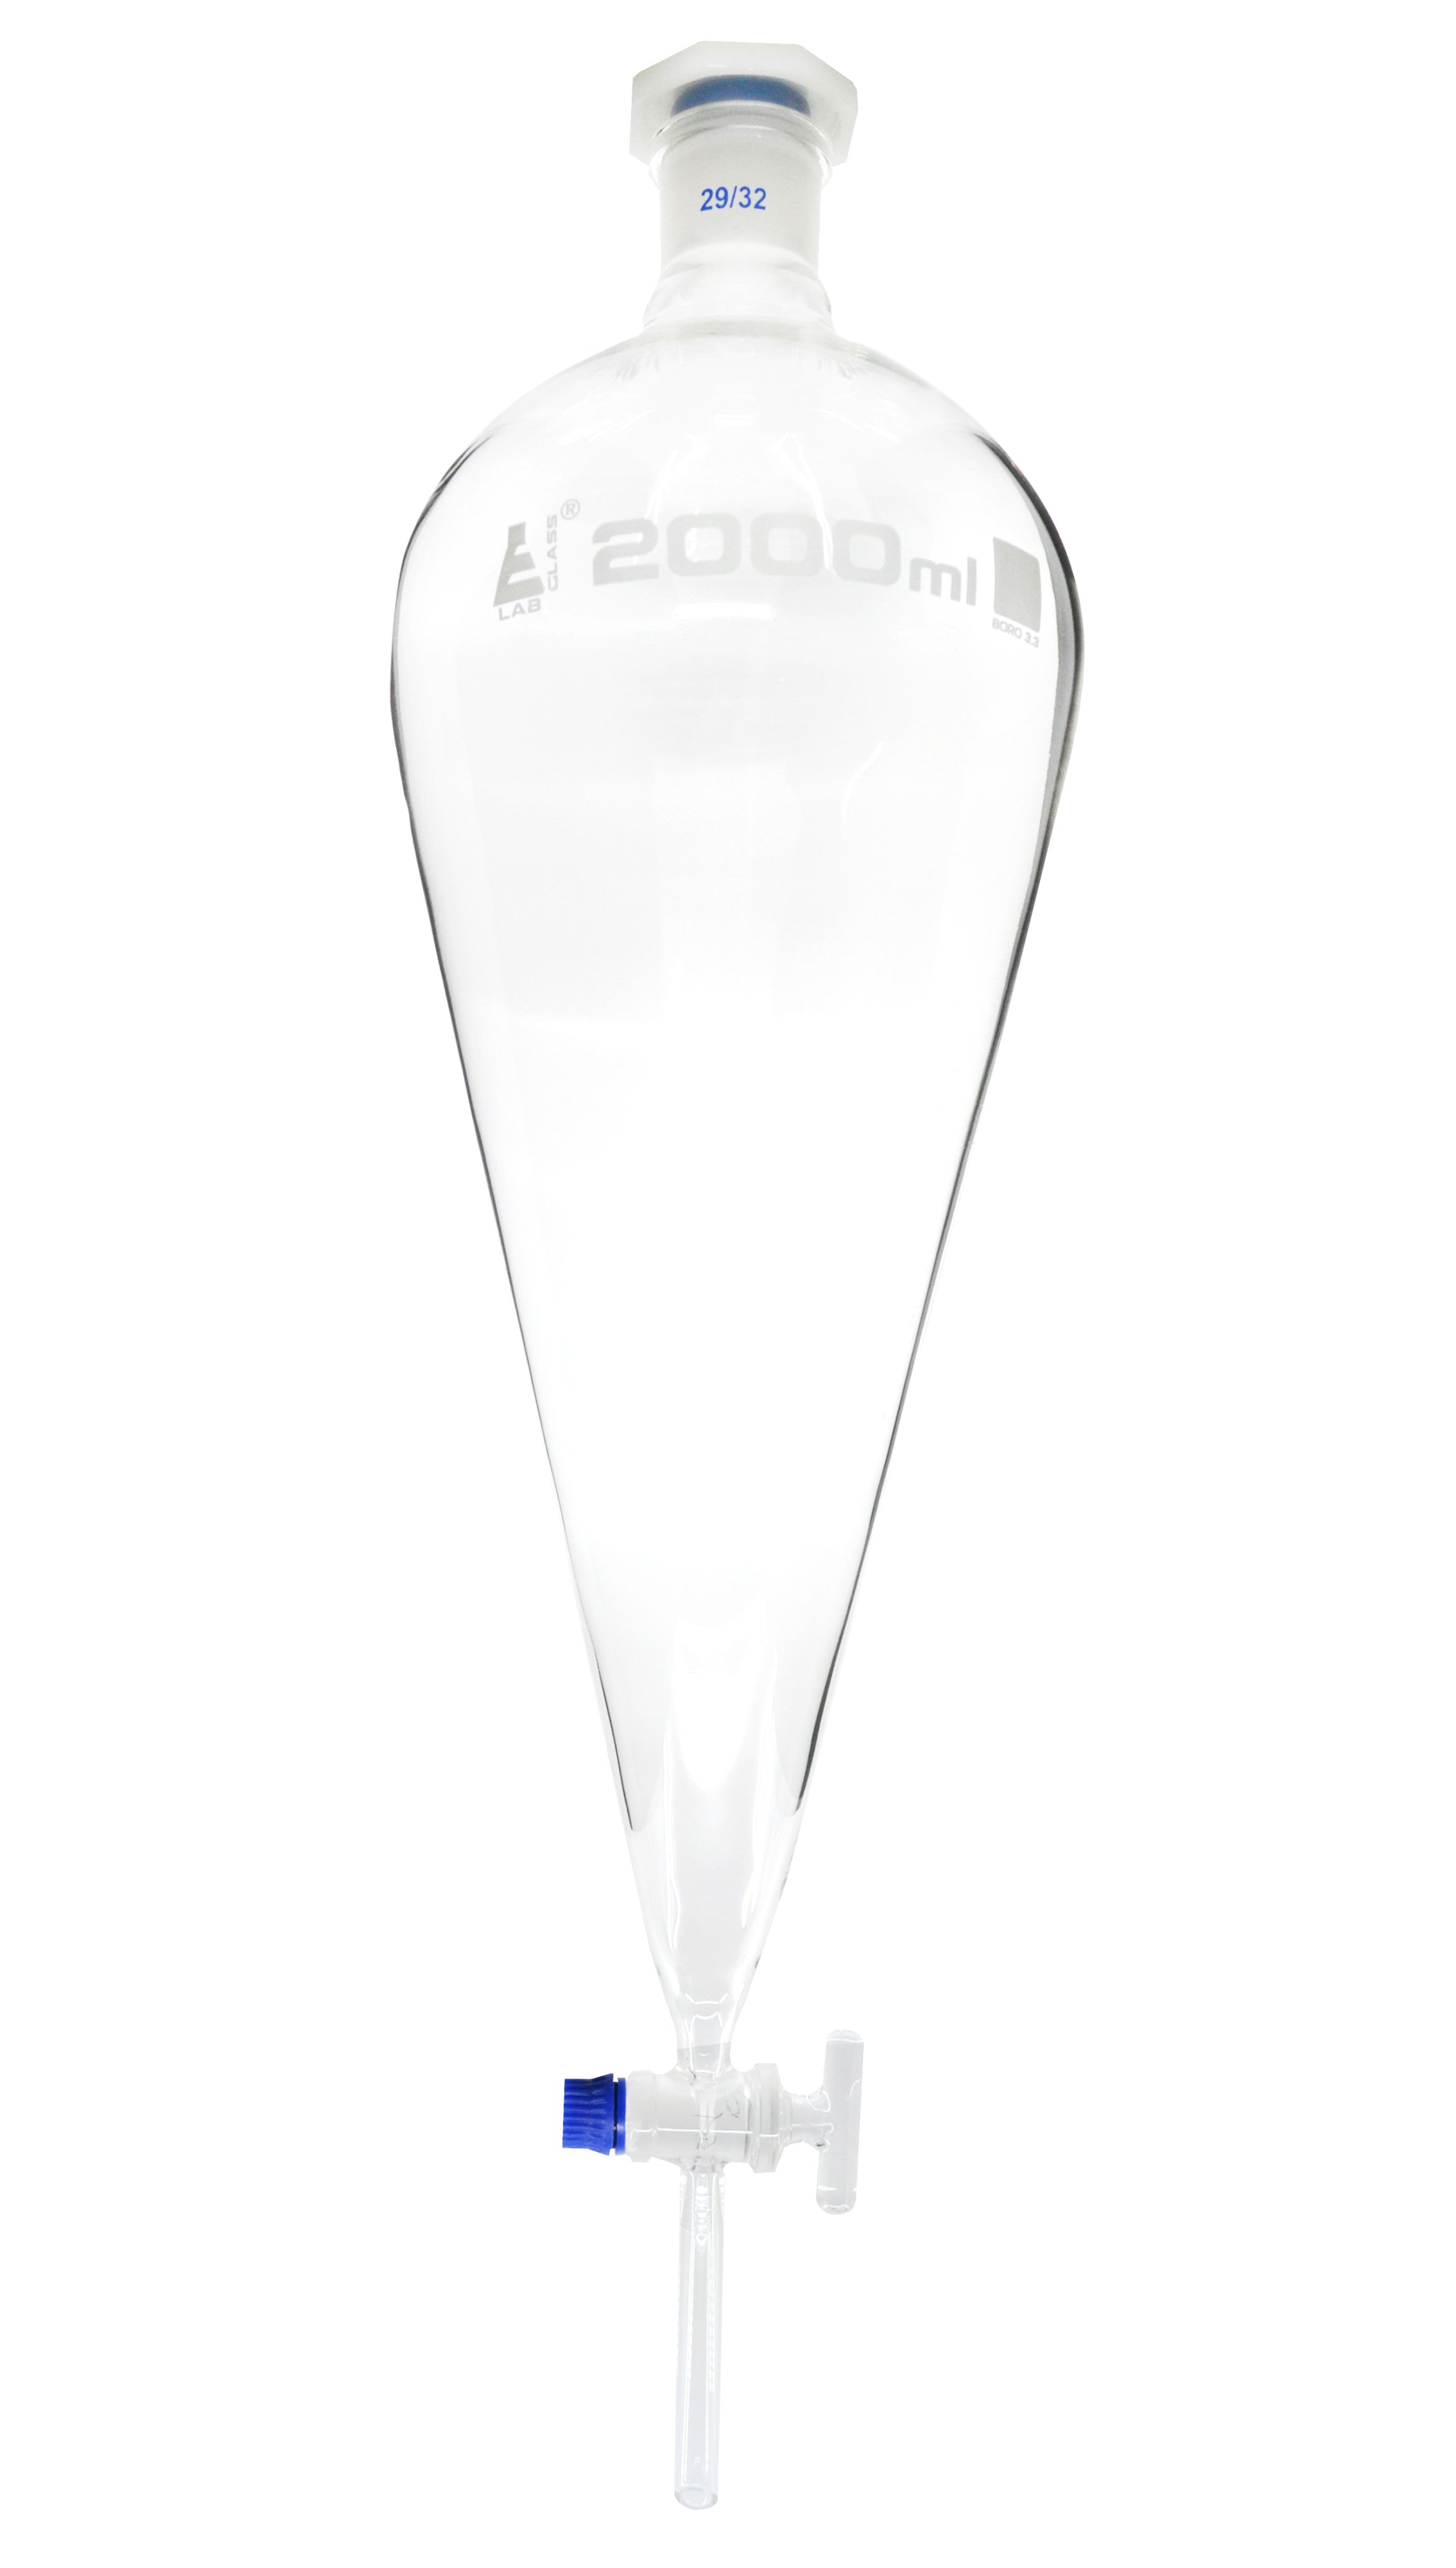 Glass Squibb Separatory Funnel with Glass Key Stopcock and Interchangeable Polypropylene Stopper, 2,000 ml, Autoclavable